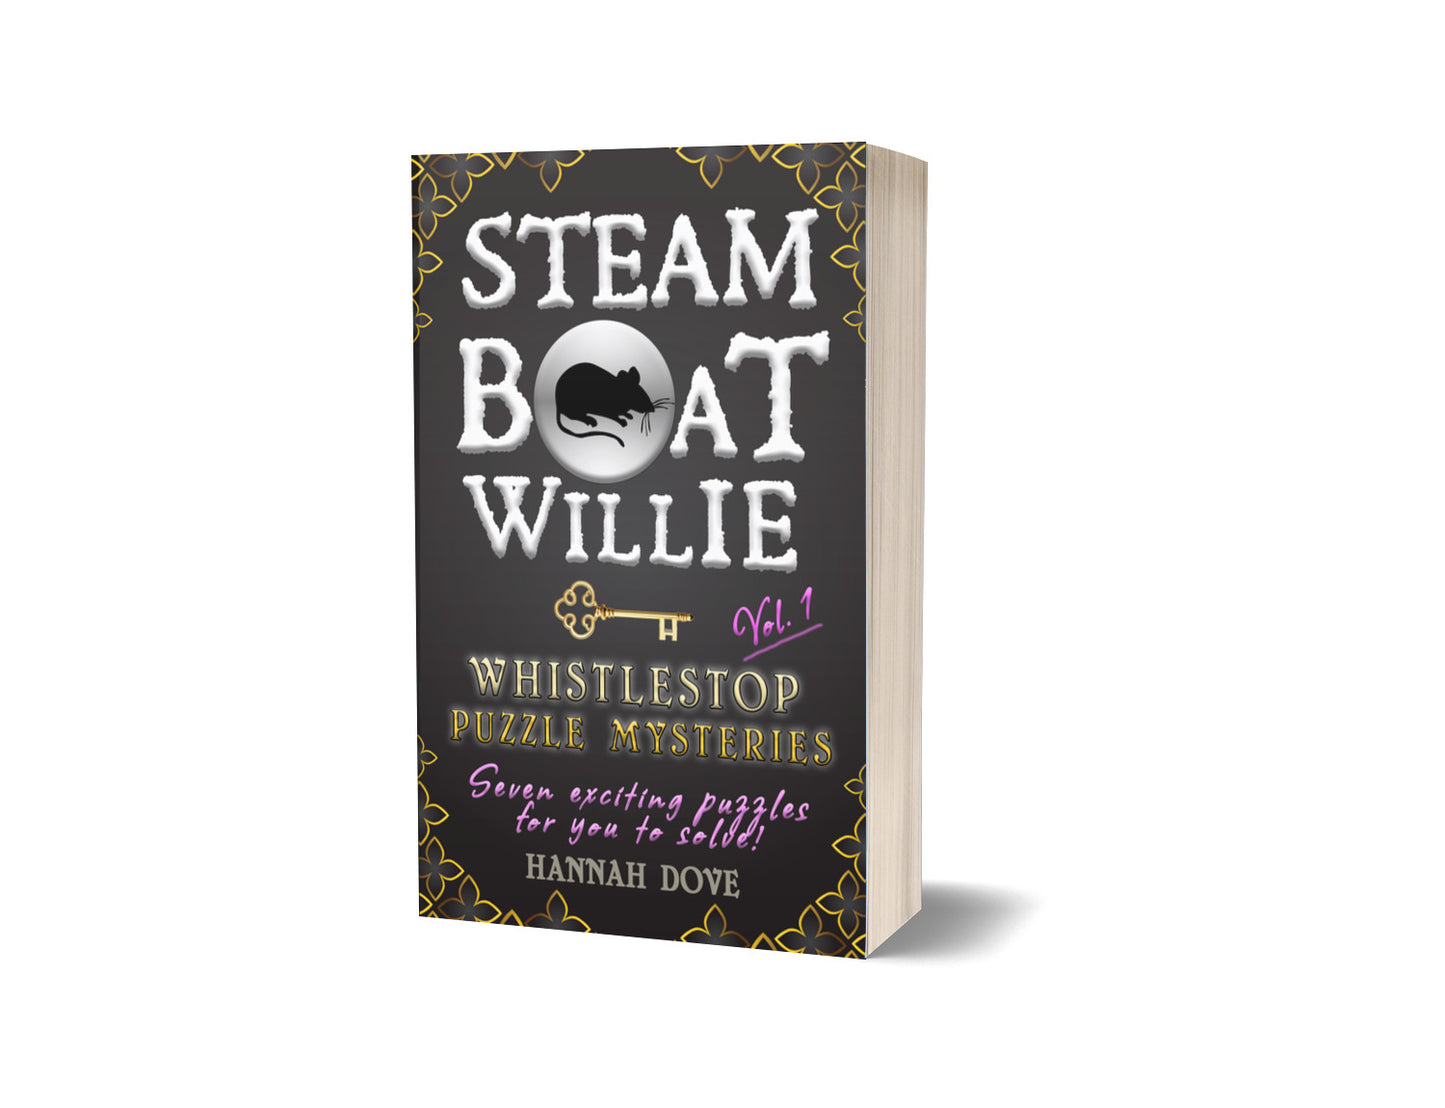 Steamboat Willie Whistlestop Puzzle Mysteries (Vol. 1)